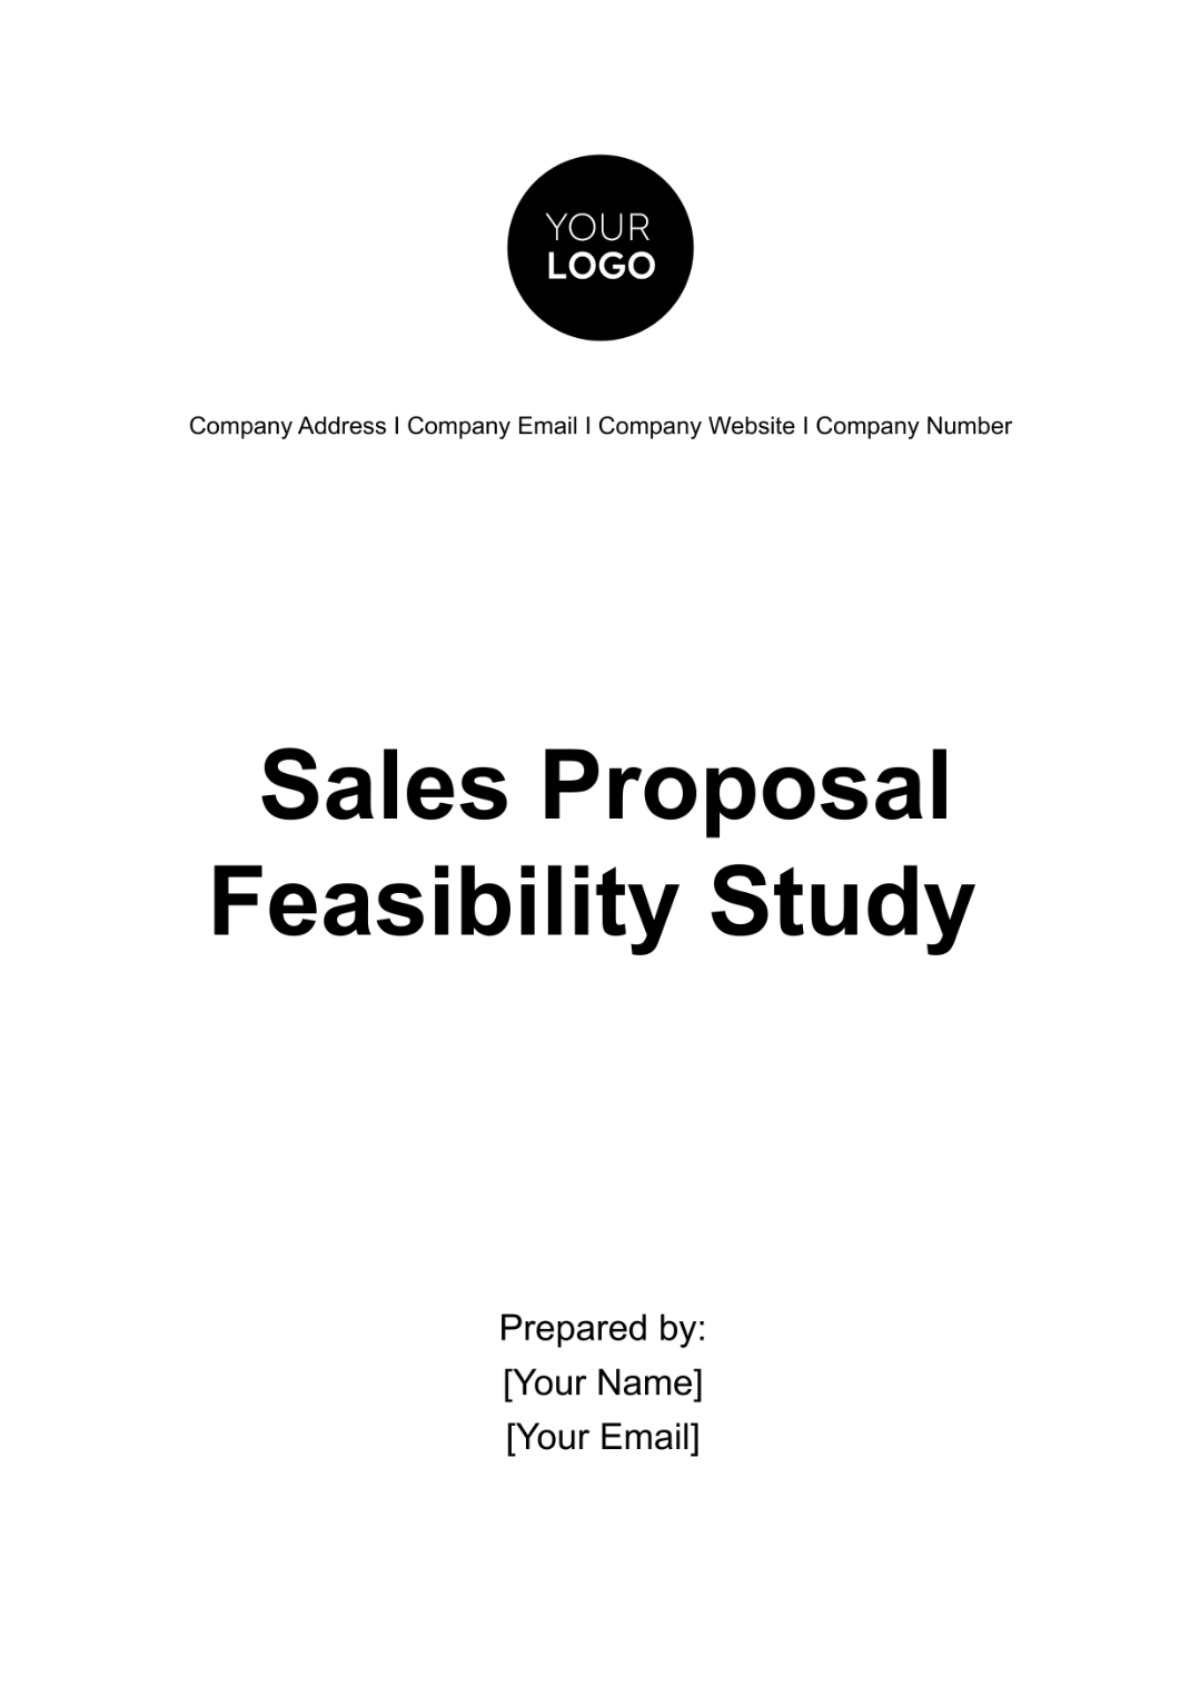 Free Sales Proposal Feasibility Study Template